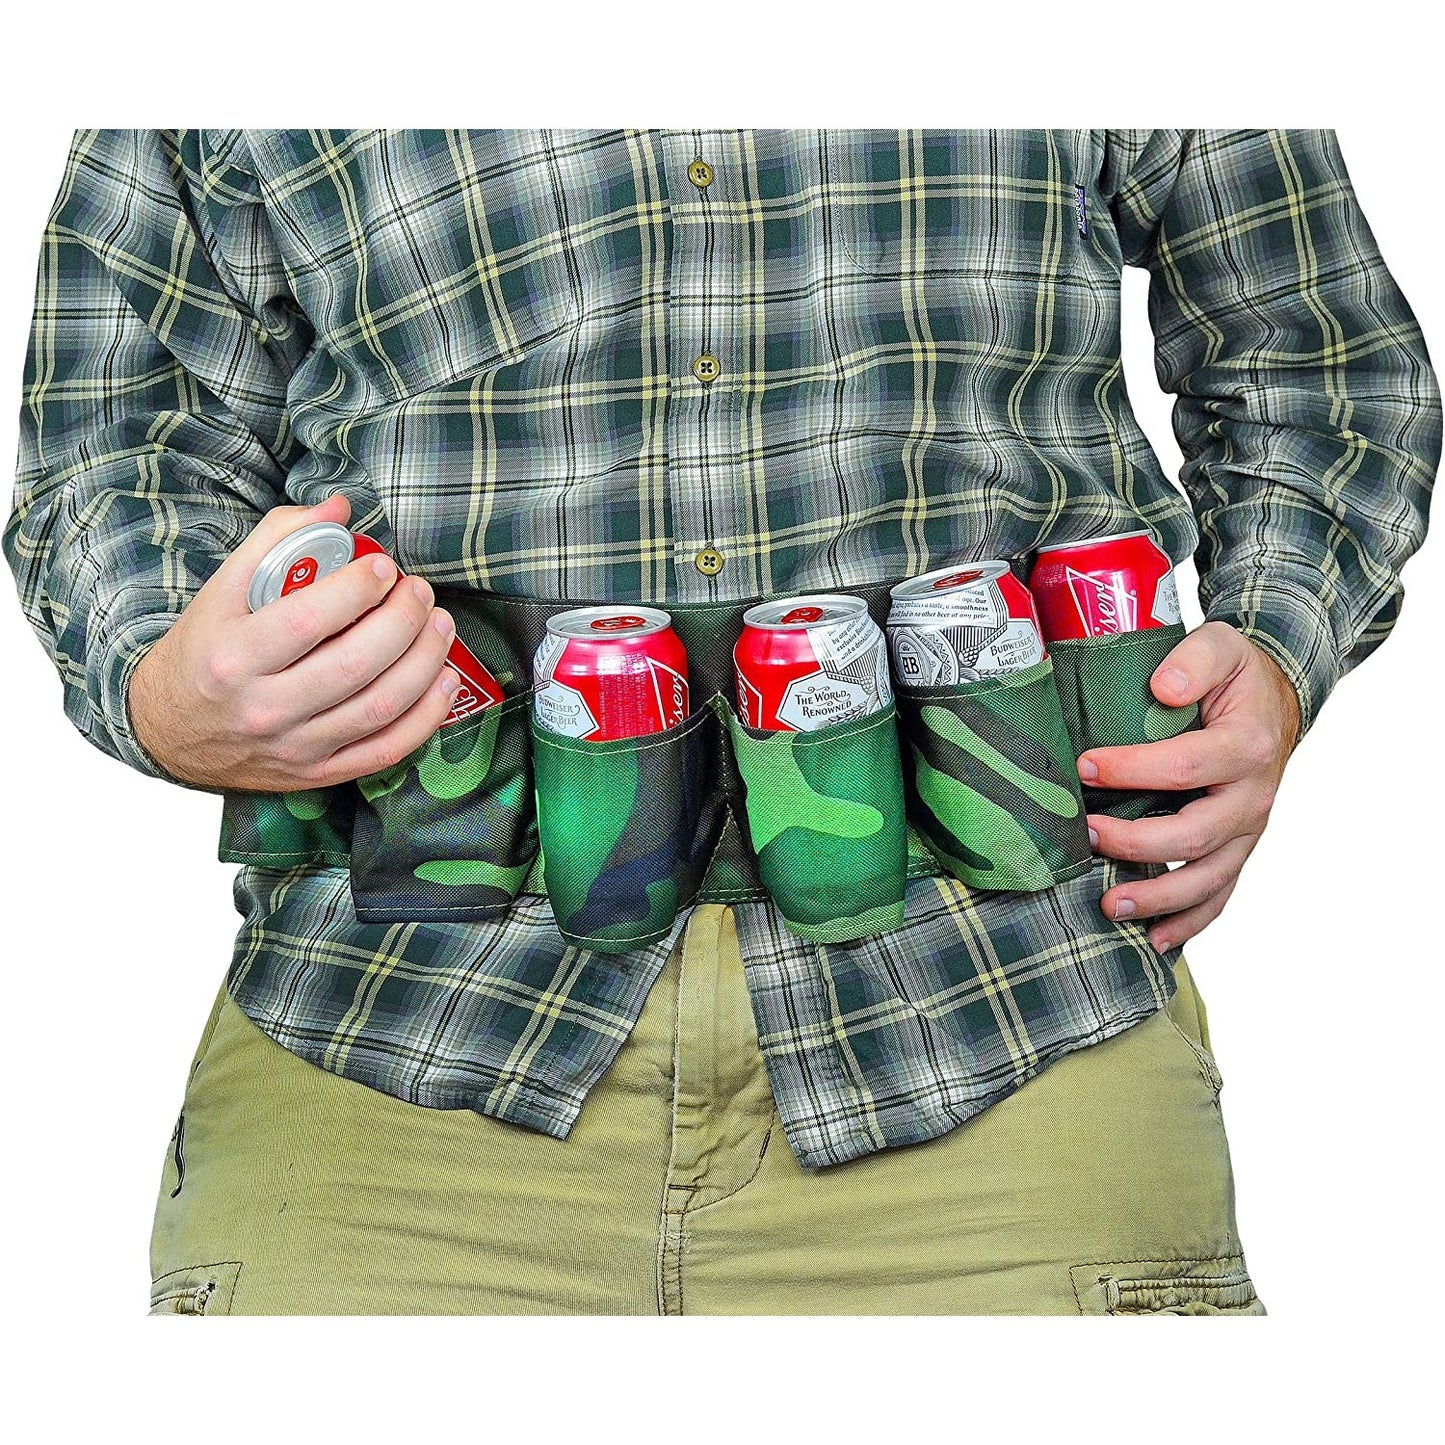 A man can be sen from the sholders down wearing a 6 pack beer and soda can belt holder.